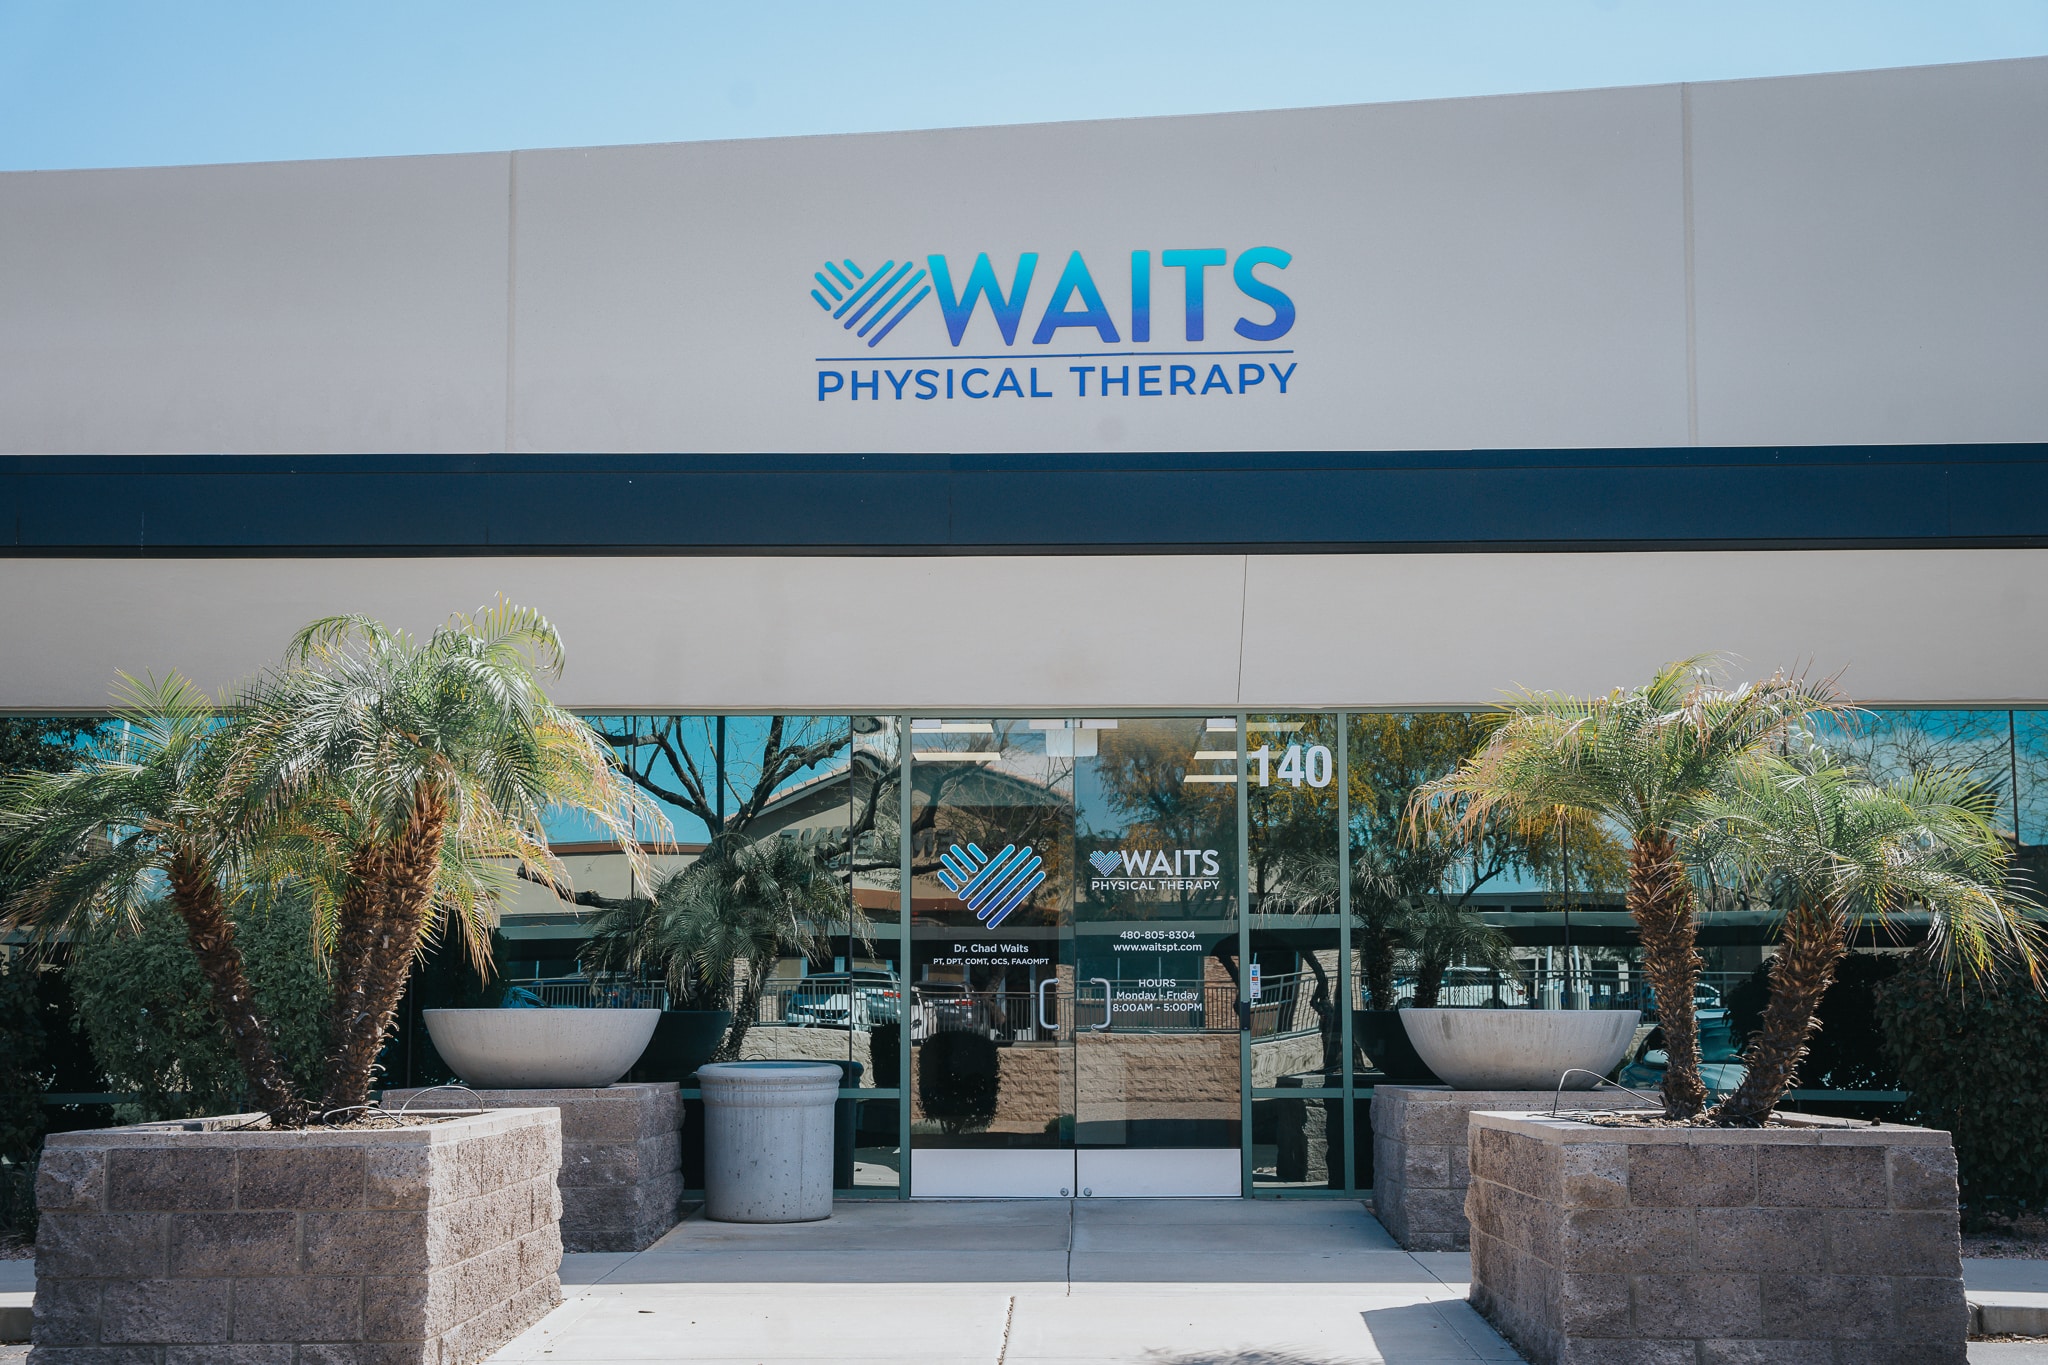 Outside view of waits physical therapy clinic